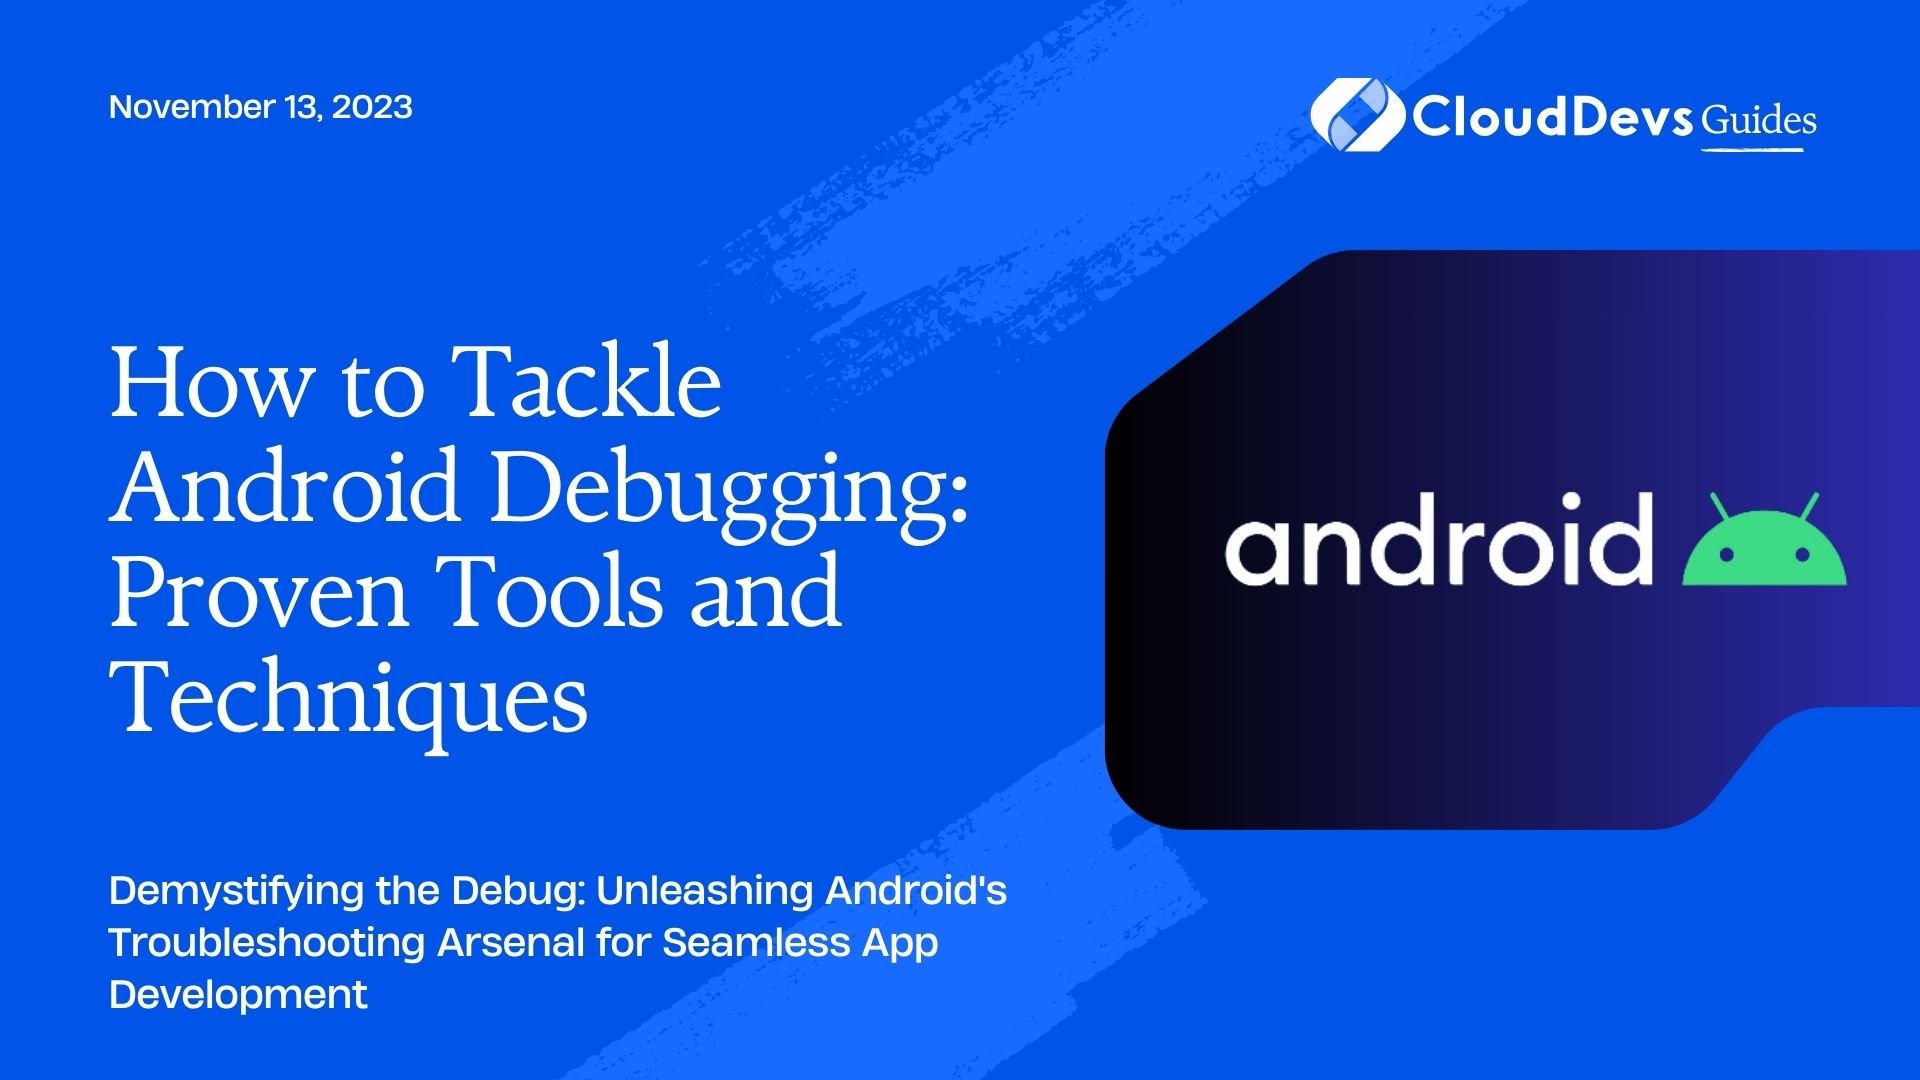 How to Tackle Android Debugging: Proven Tools and Techniques